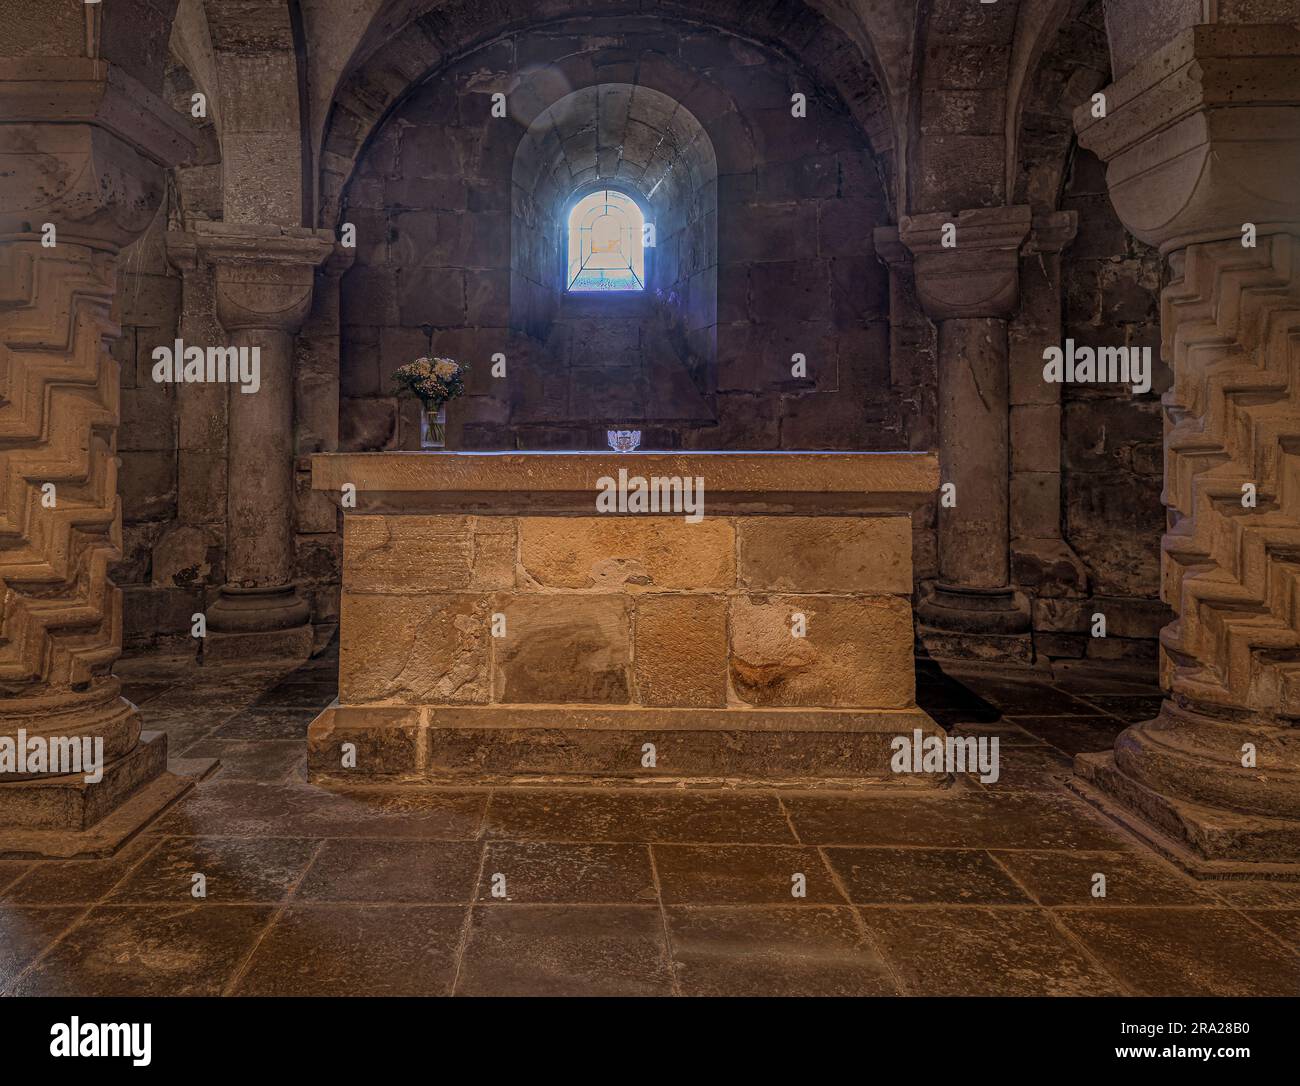 Altar in the crypt of Lund Cathedral inagurated 30th of June 1123, Lund, Sweden, June 30, 2023 Stock Photo